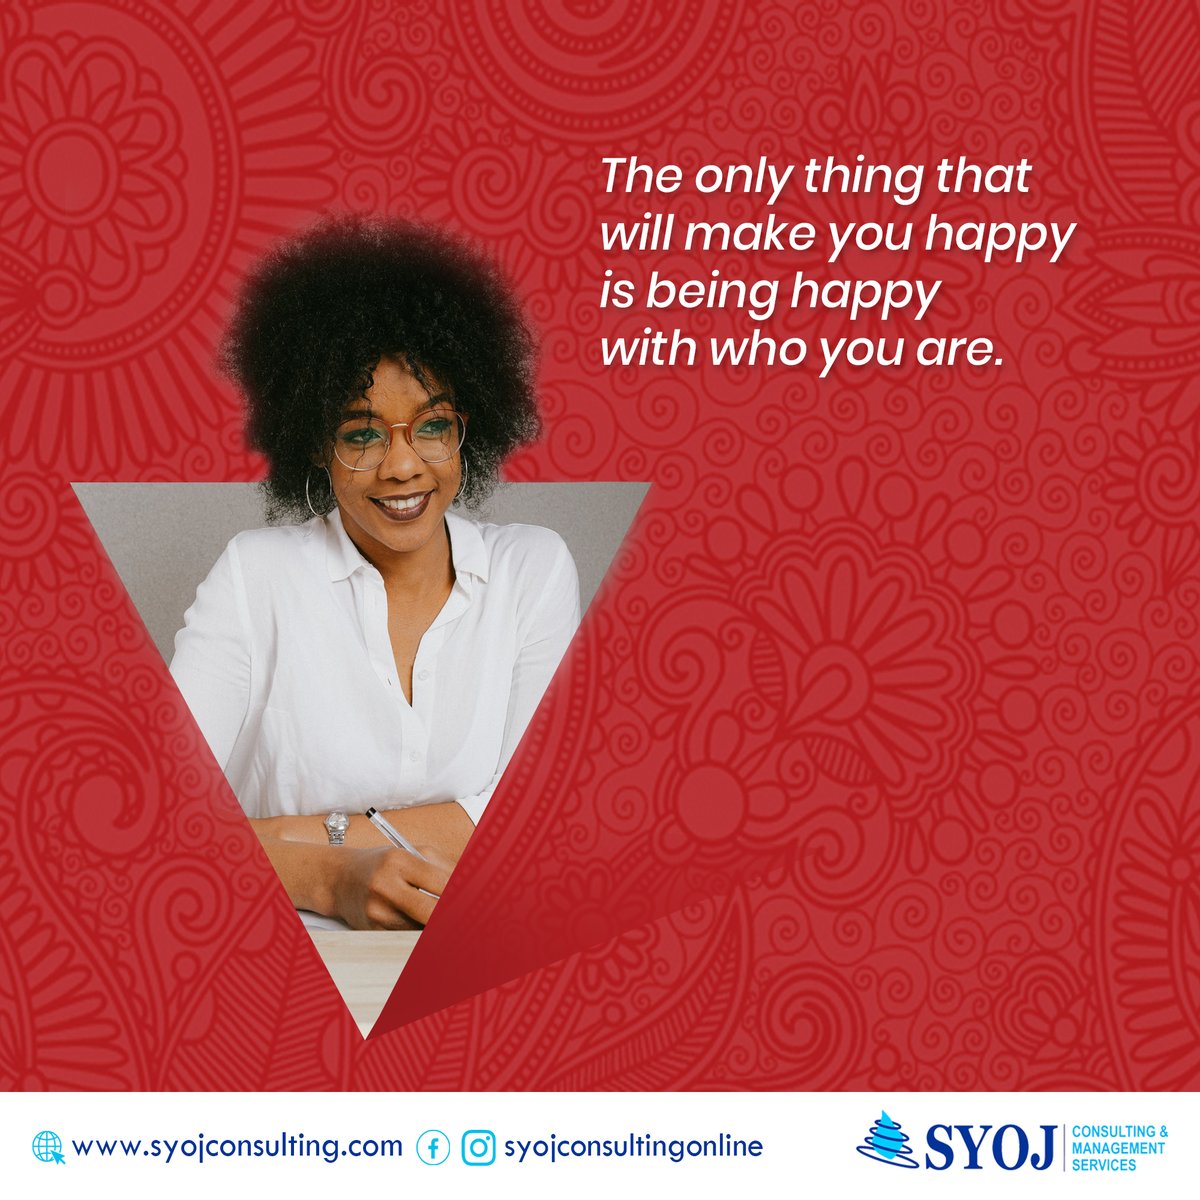 The only thing that will make you happy is being happy with who you are.

#syojconsultingonline #companygrowth #makingprofit #achievinggoals #hrautomation #lagos #nigeria